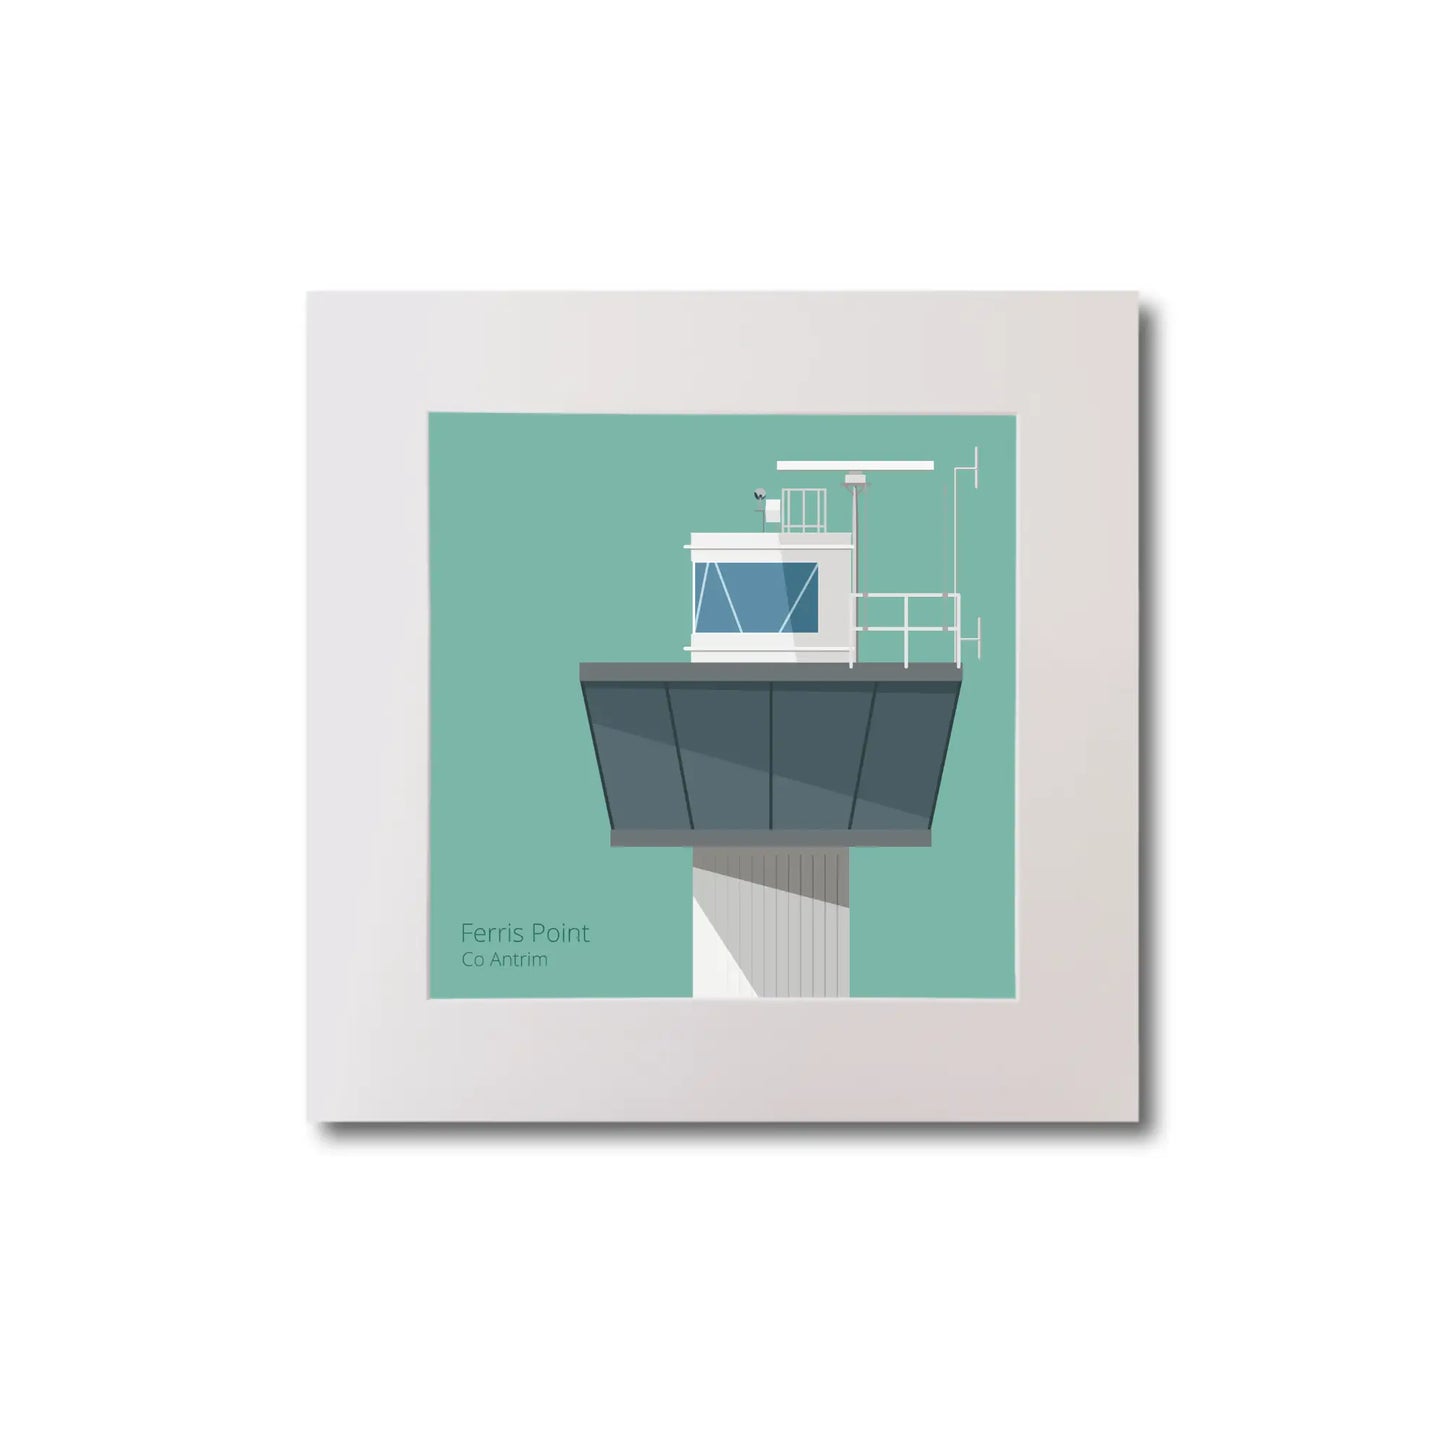 Illustration of Ferris_Point lighthouse on an ocean green background, mounted and measuring 20x20cm.